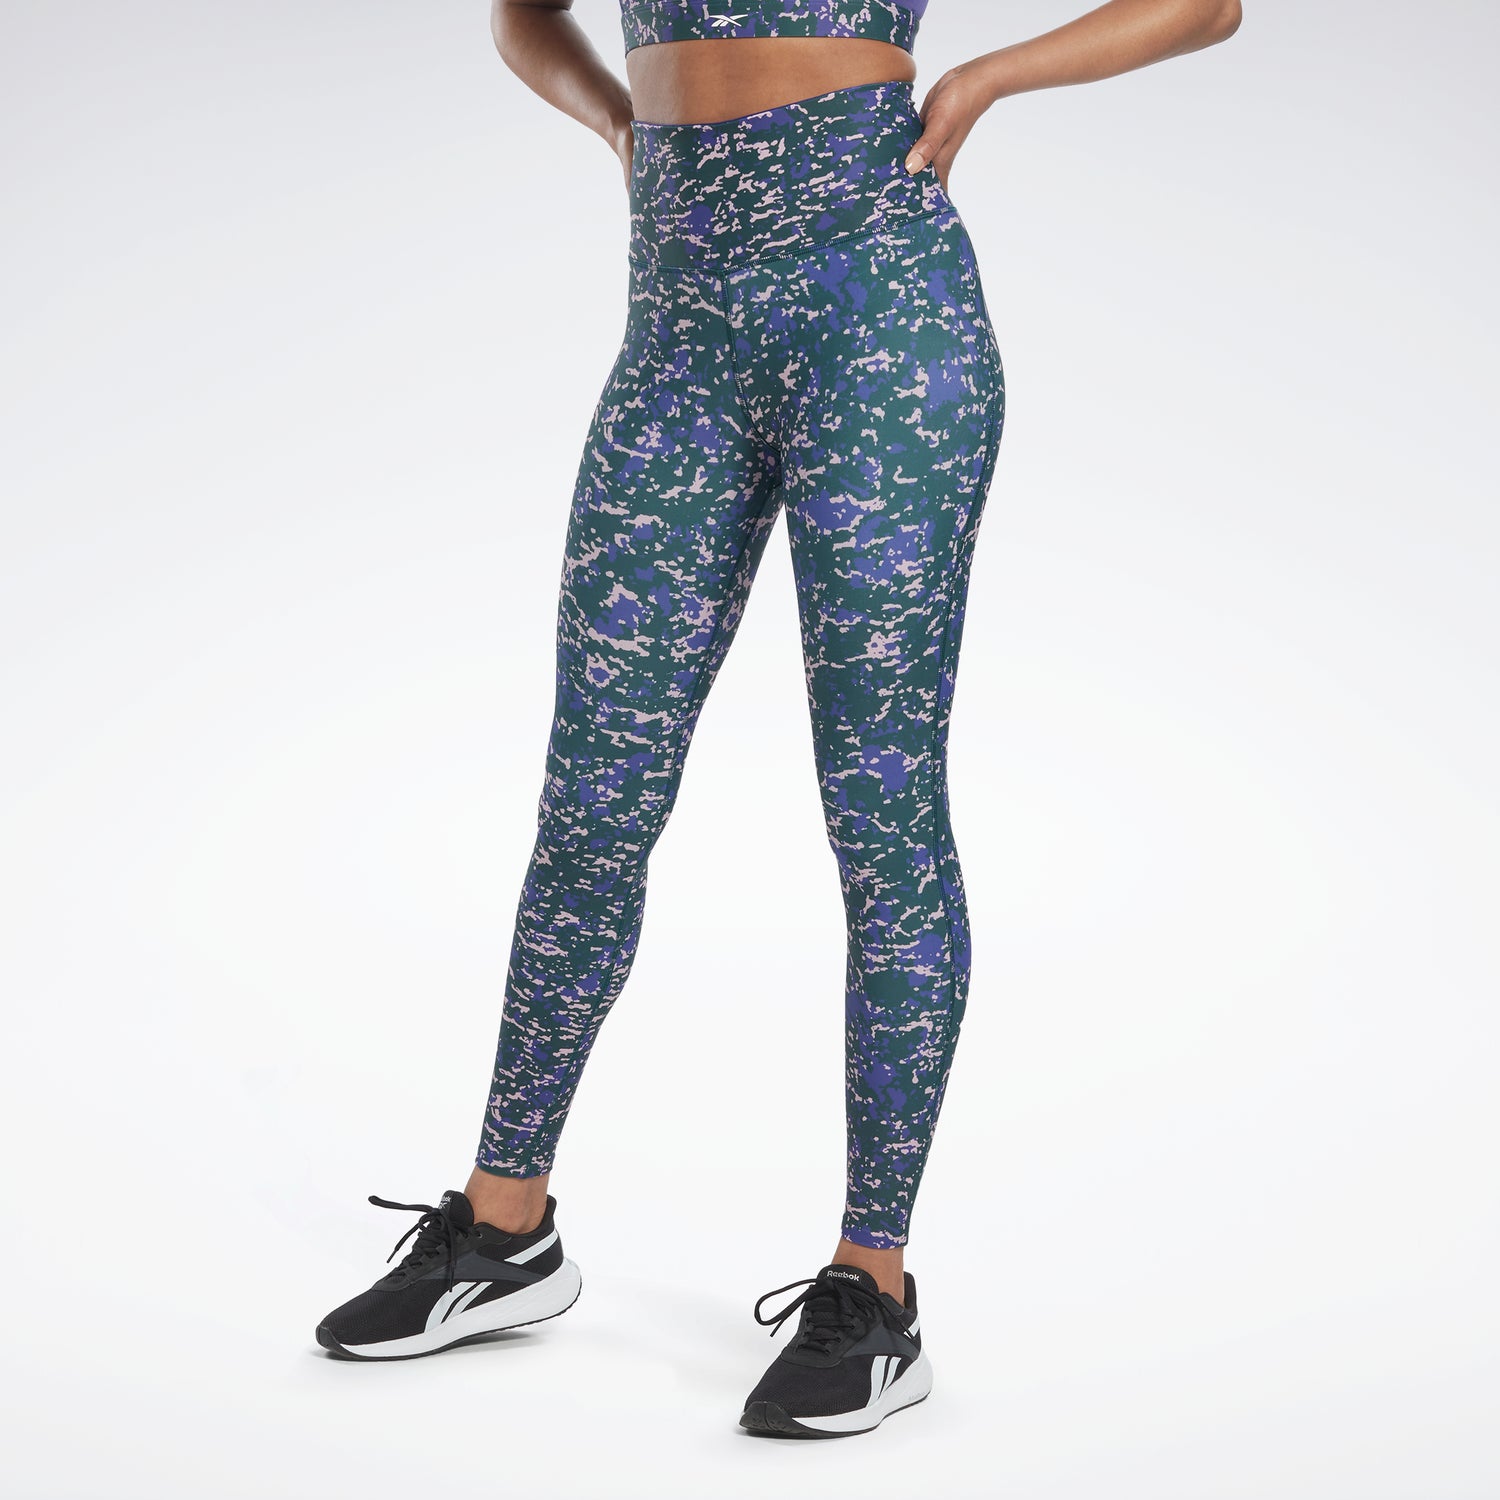 Leggings & Tights | TIGHTS 1/1 - Price (High - Low)